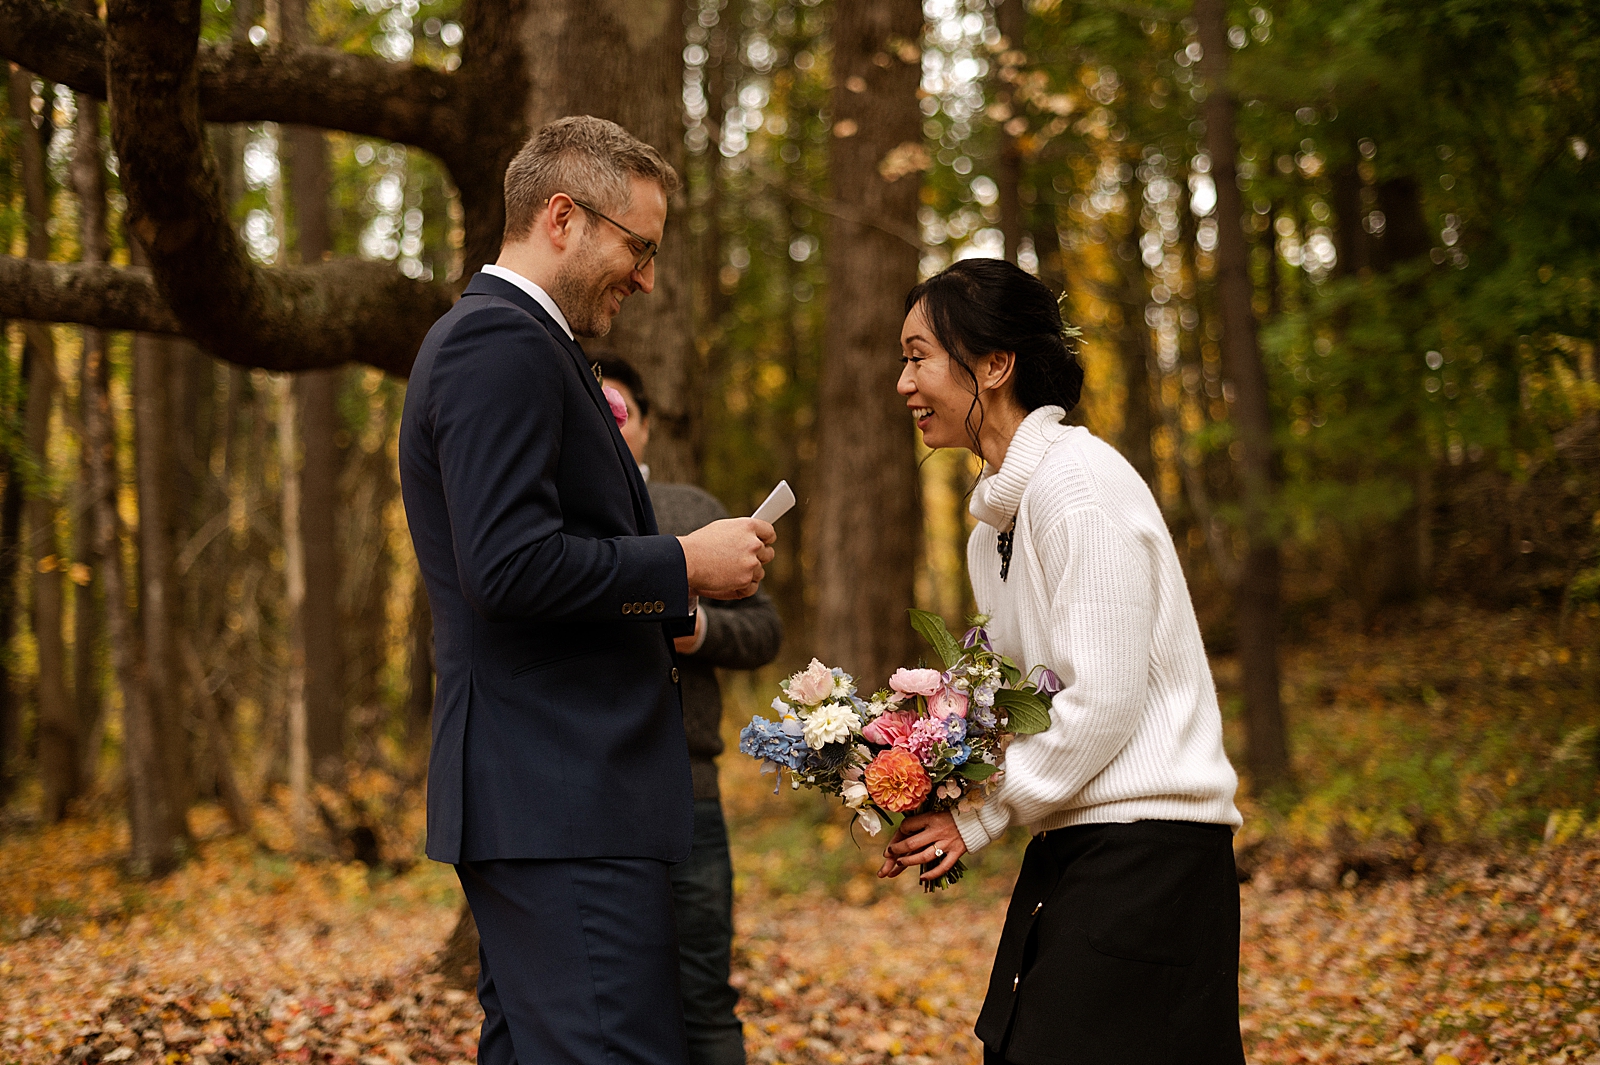 Bride laughing while Groom reading vows in fall forest